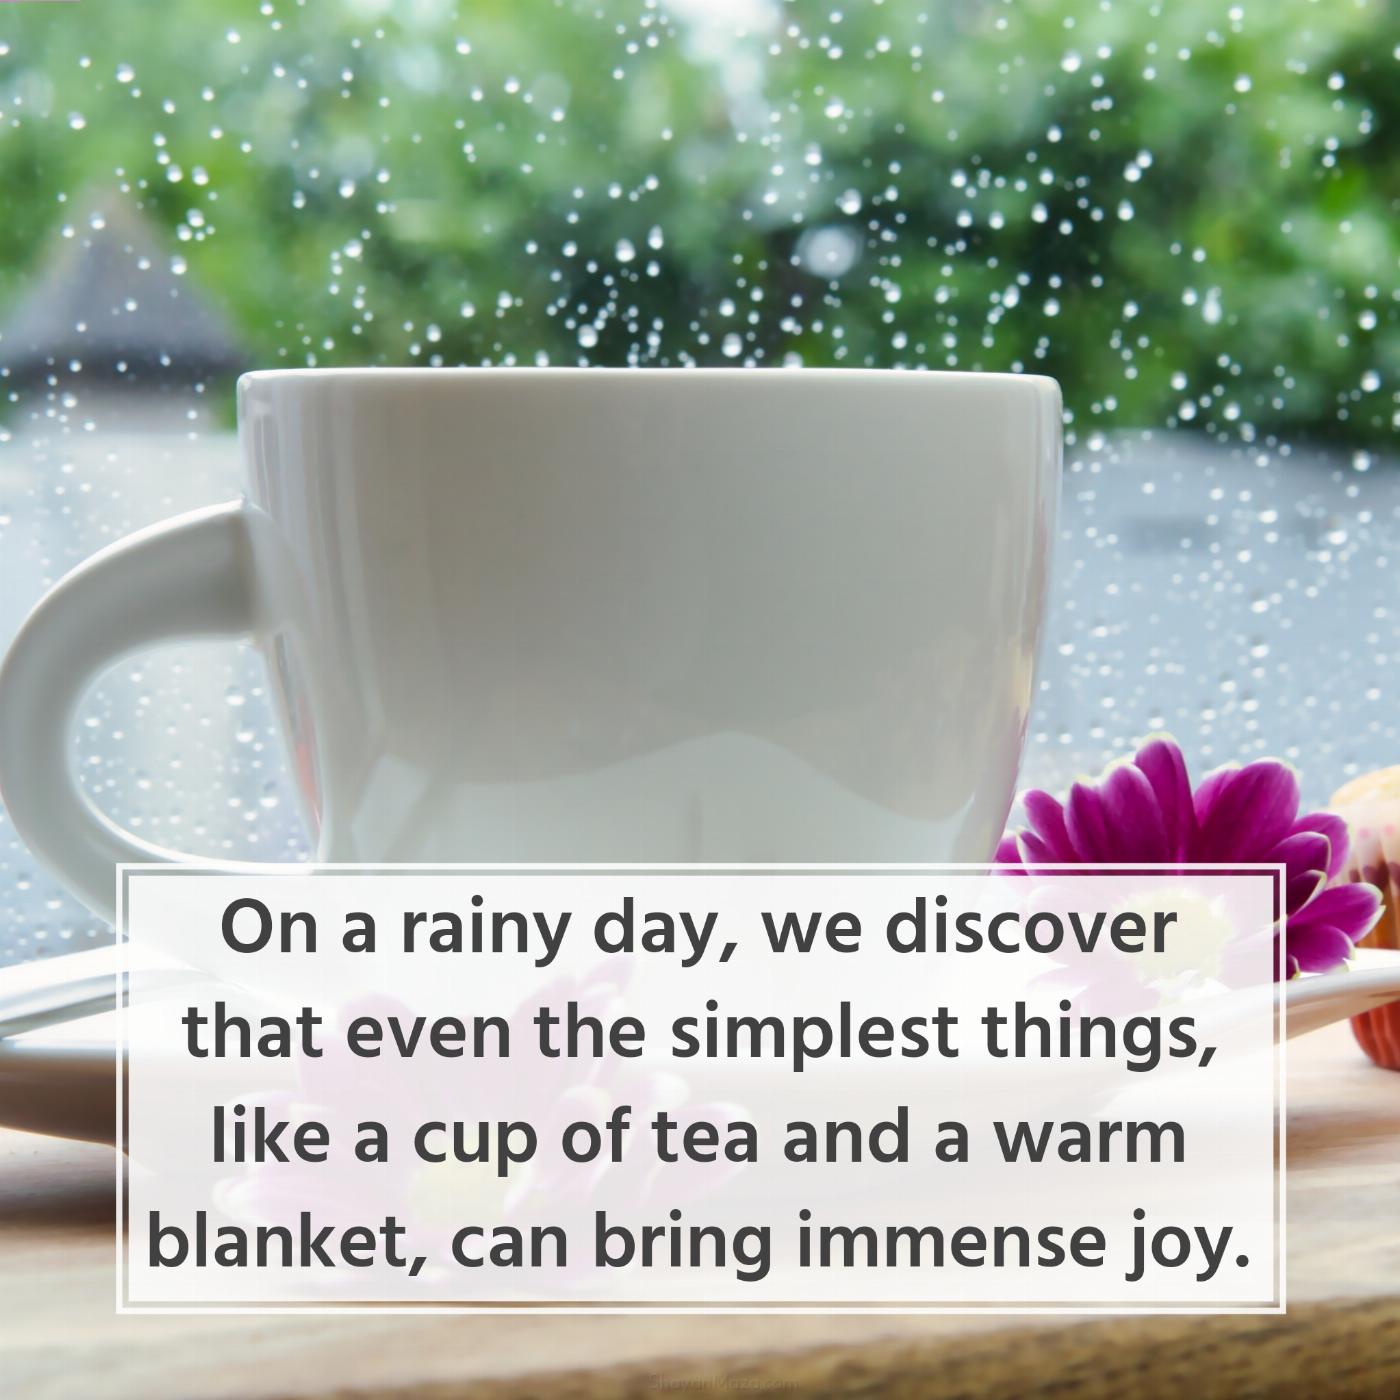 On a rainy day we discover that even the simplest things